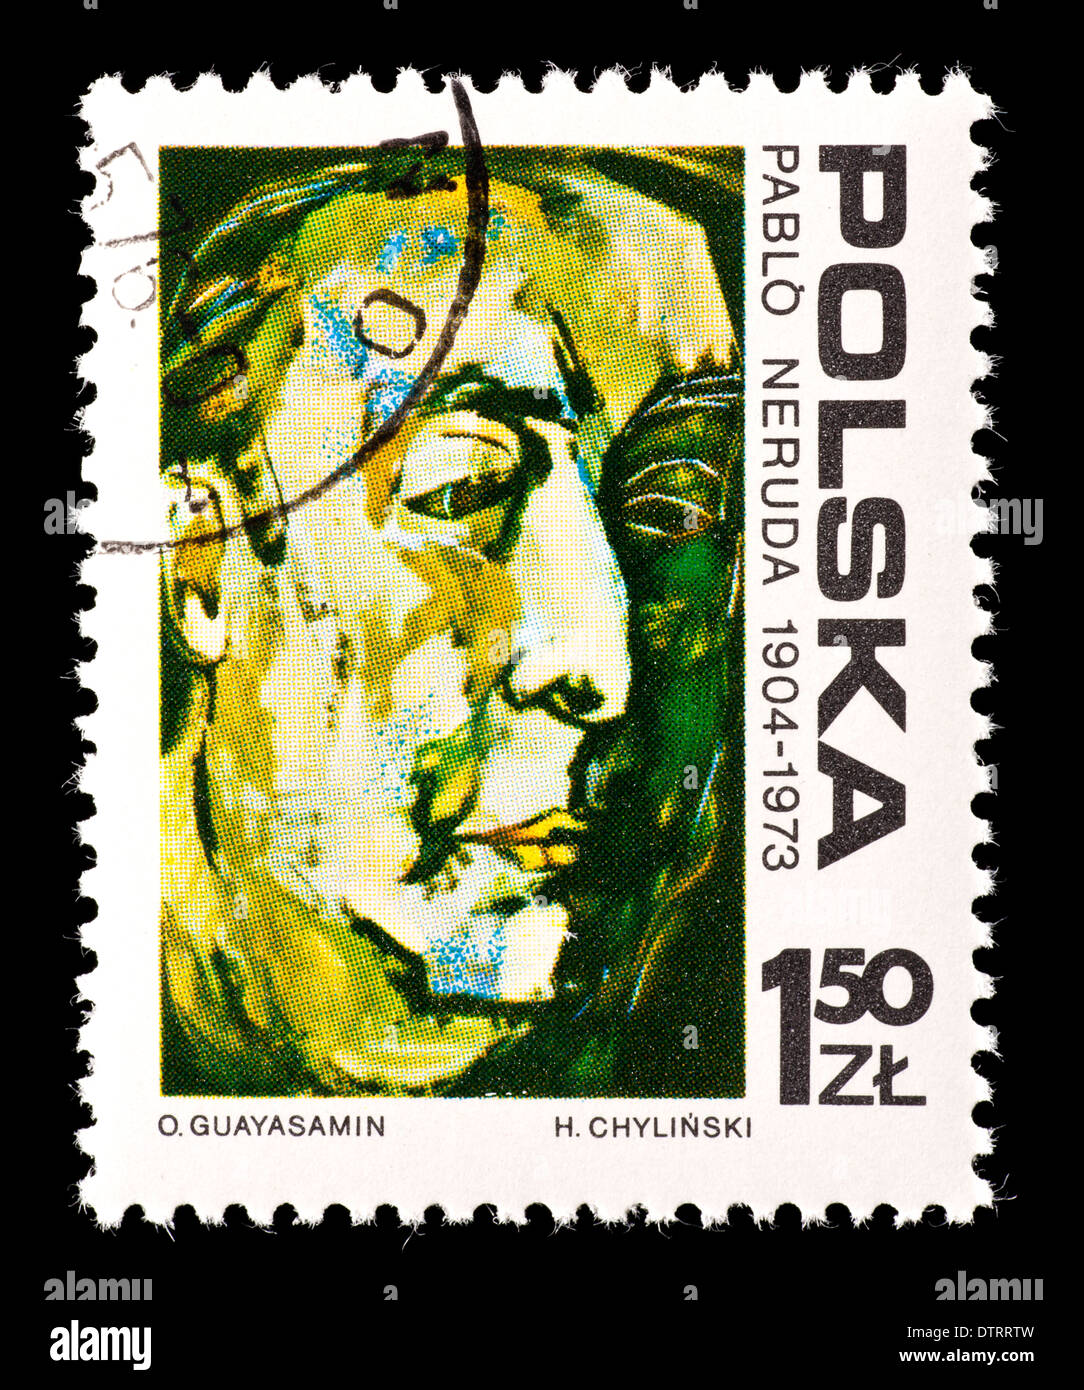 Postage stamp from Poland depicting a painting of Pablo Neruda by Osvaldo Guayasamin. Stock Photo